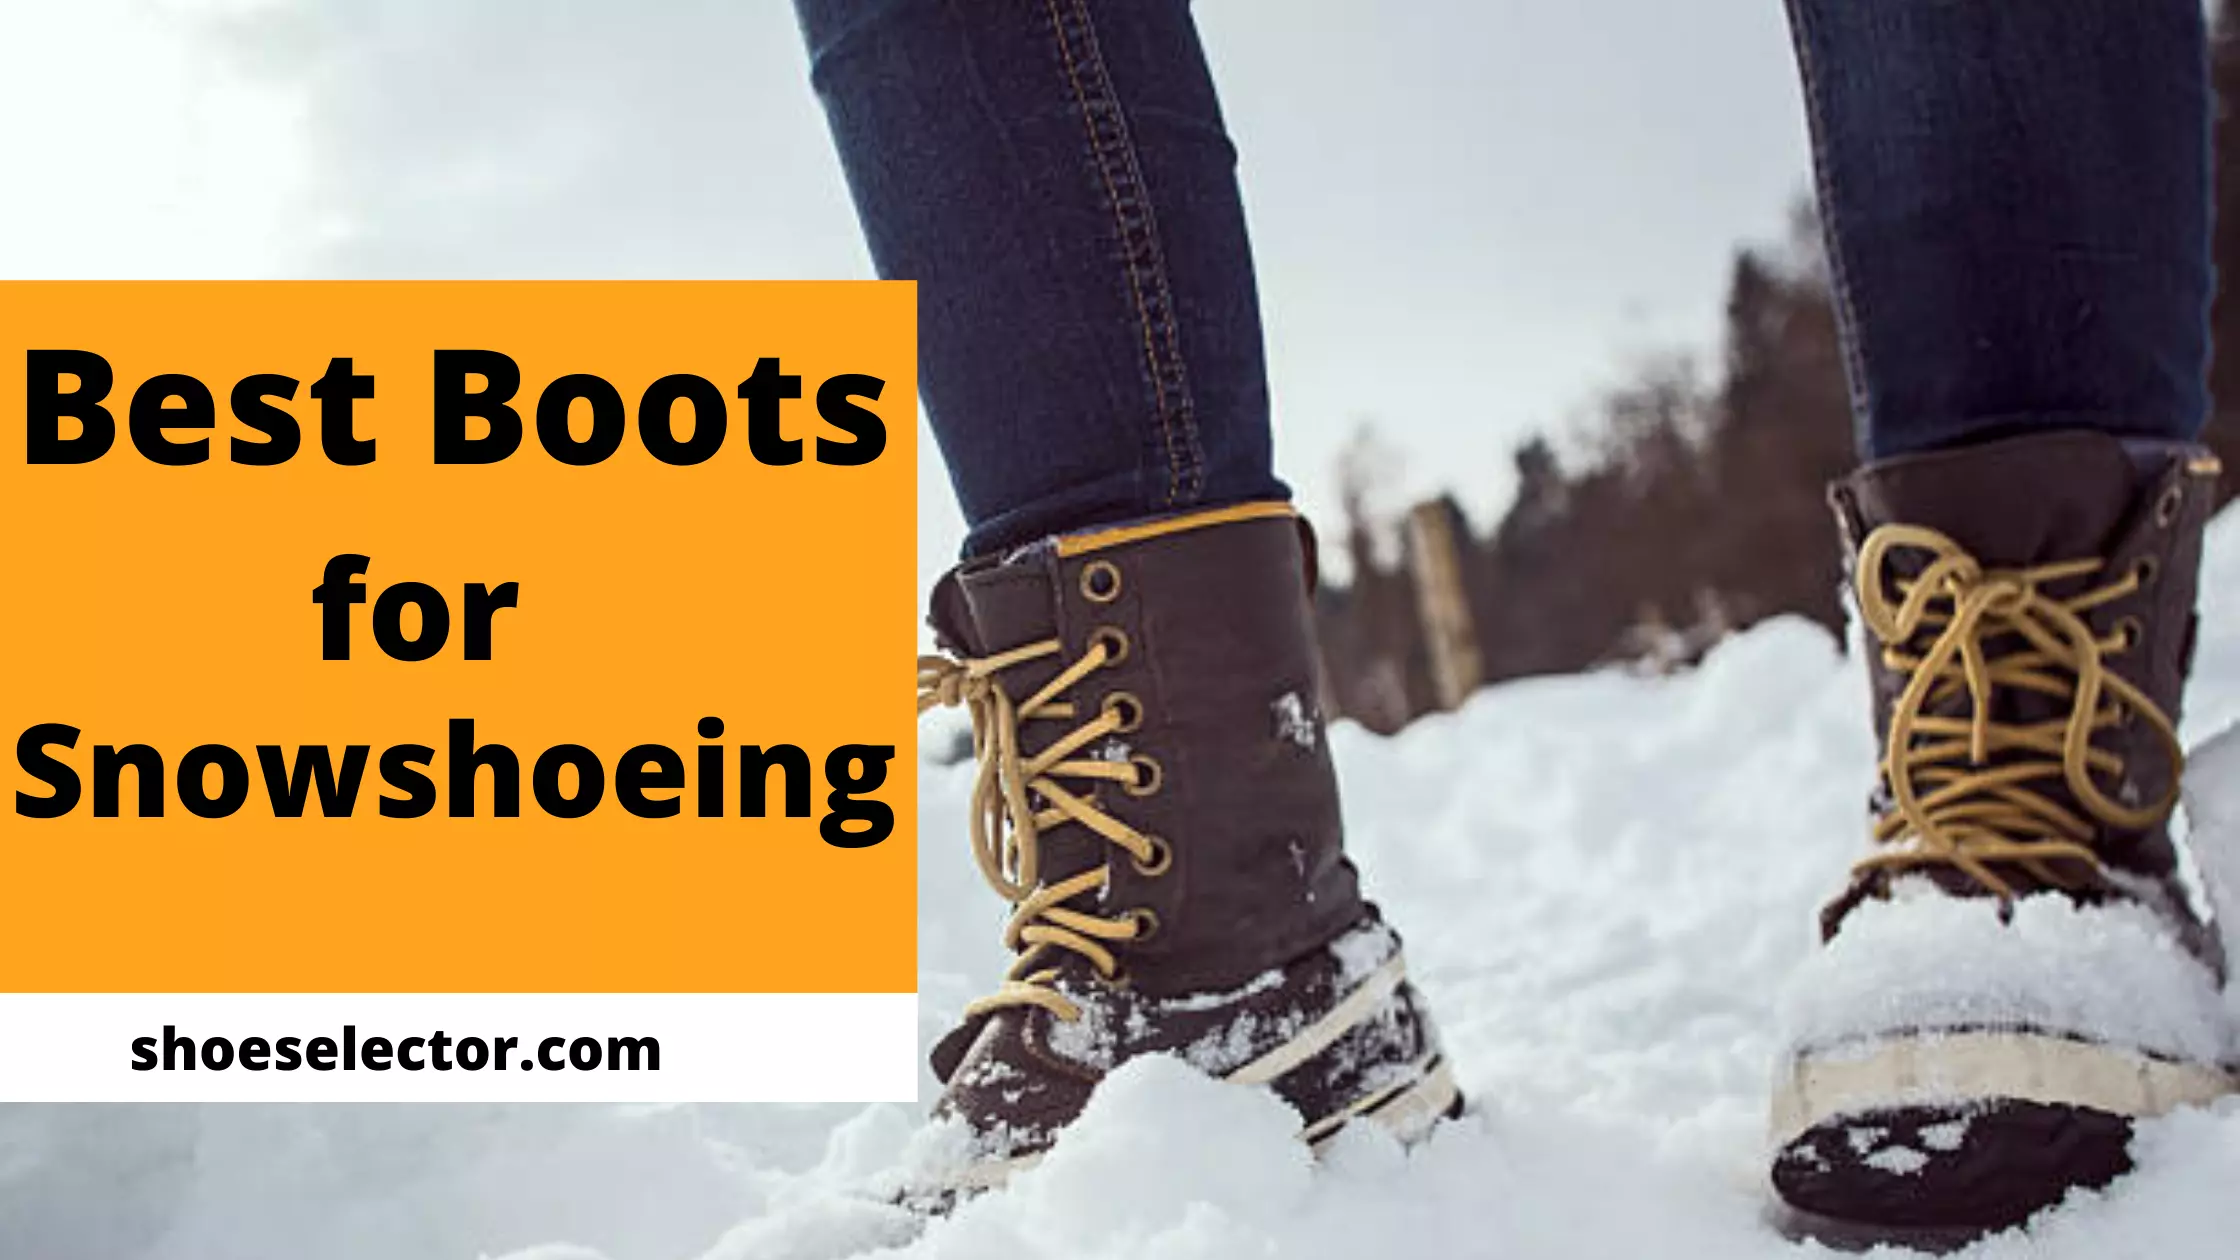 Best Boots for Snowshoeing - Sturdy Grip Shoes